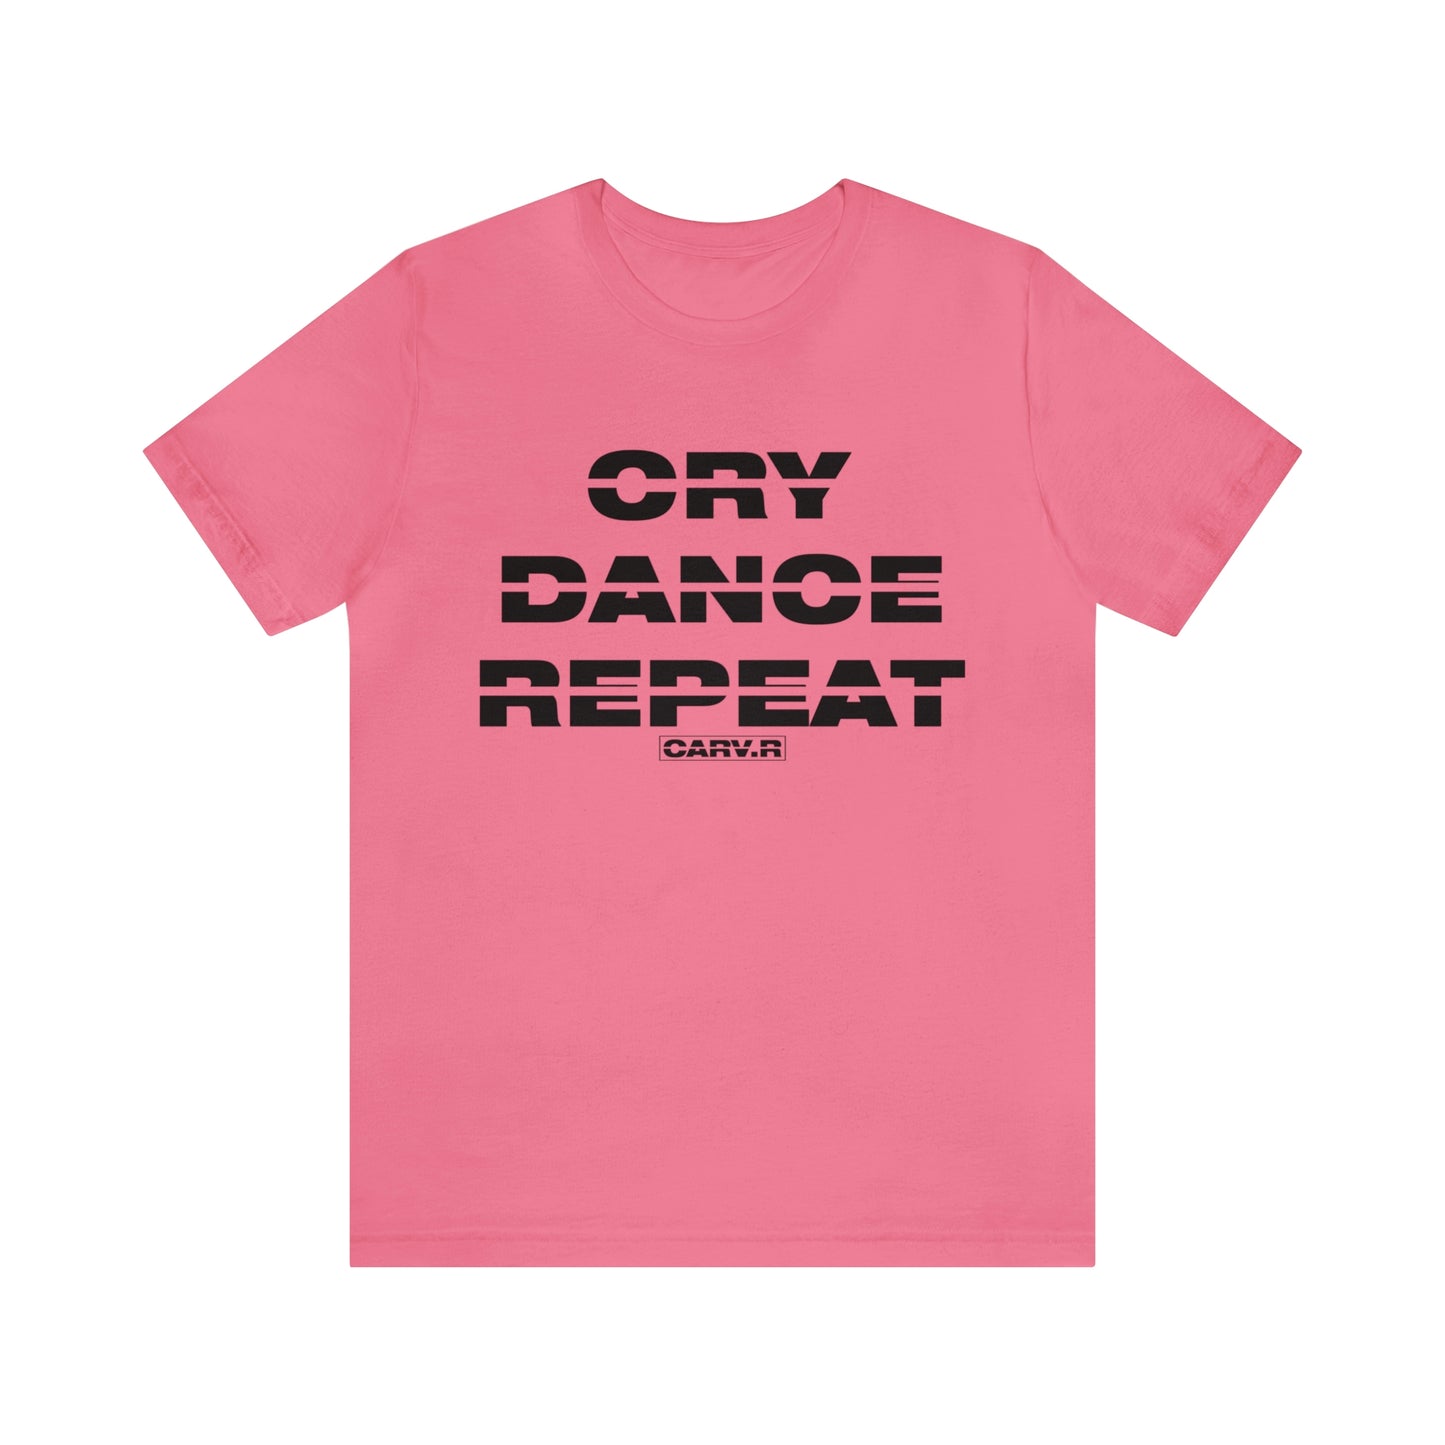 "Cry Dance Repeat" Black, White, Pink & Red T-Shirt